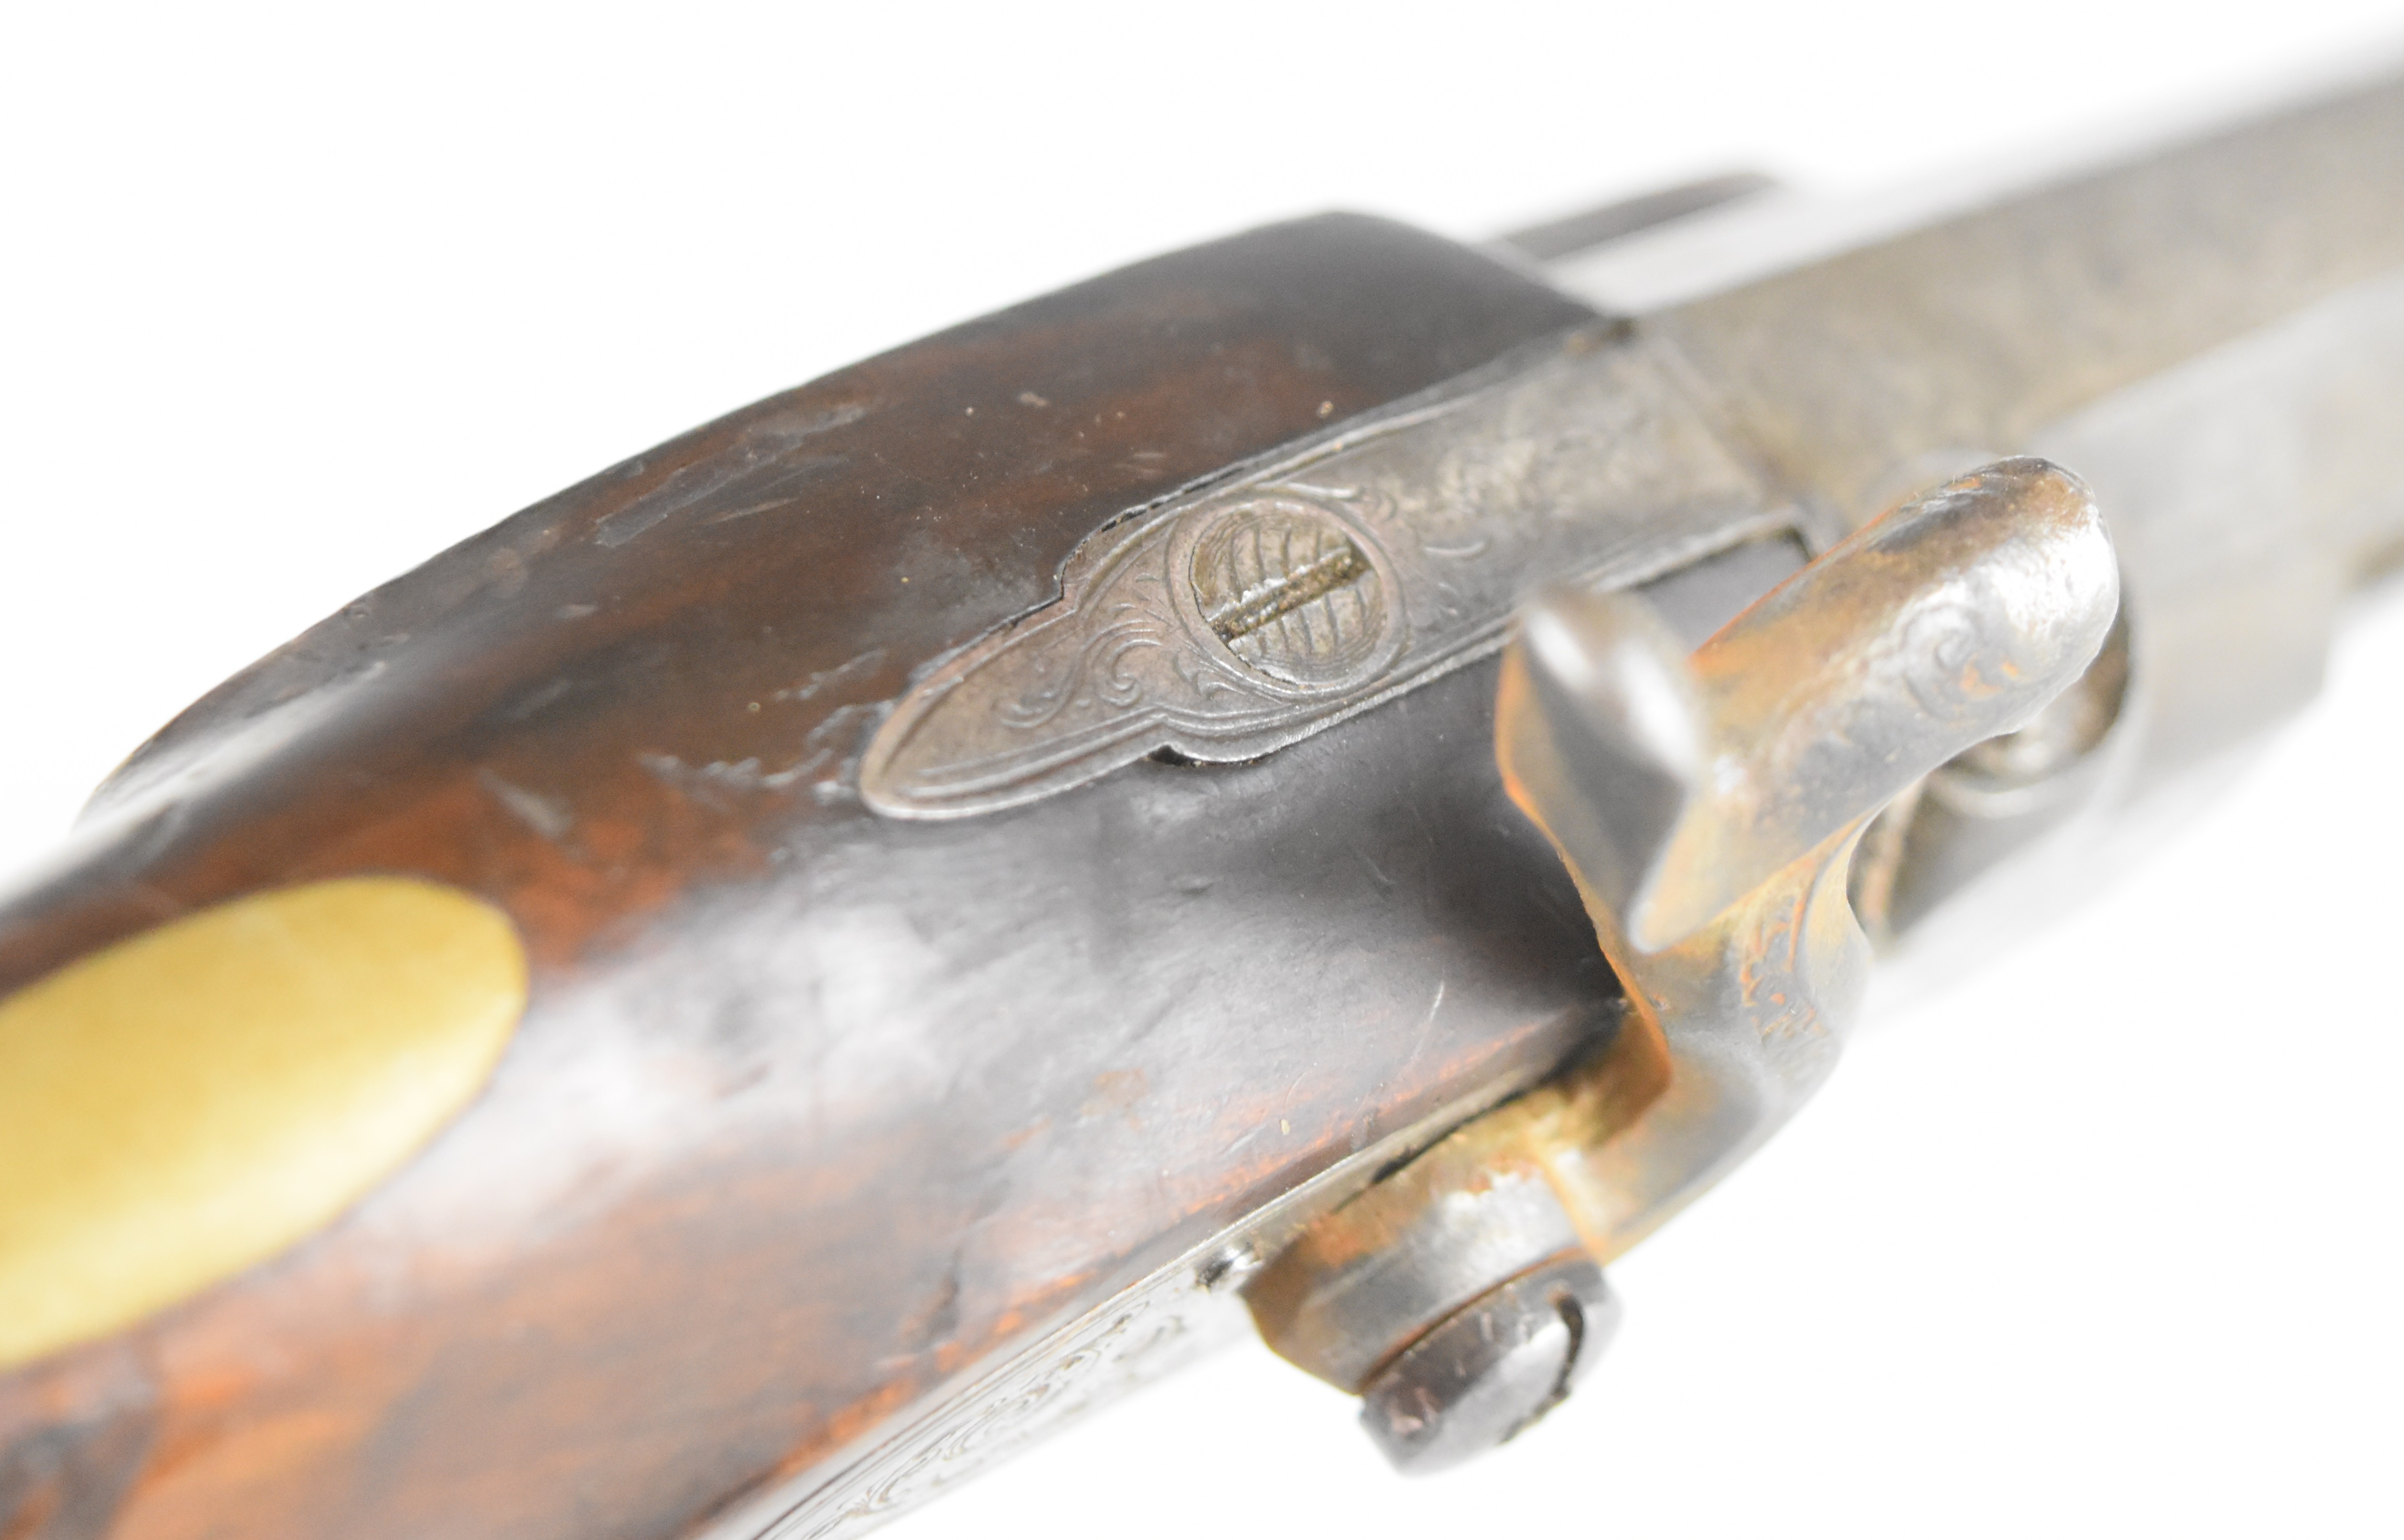 Bentley of London 36 bore percussion hammer action coat pistol with engraved lock, hammer, trigger - Image 10 of 10